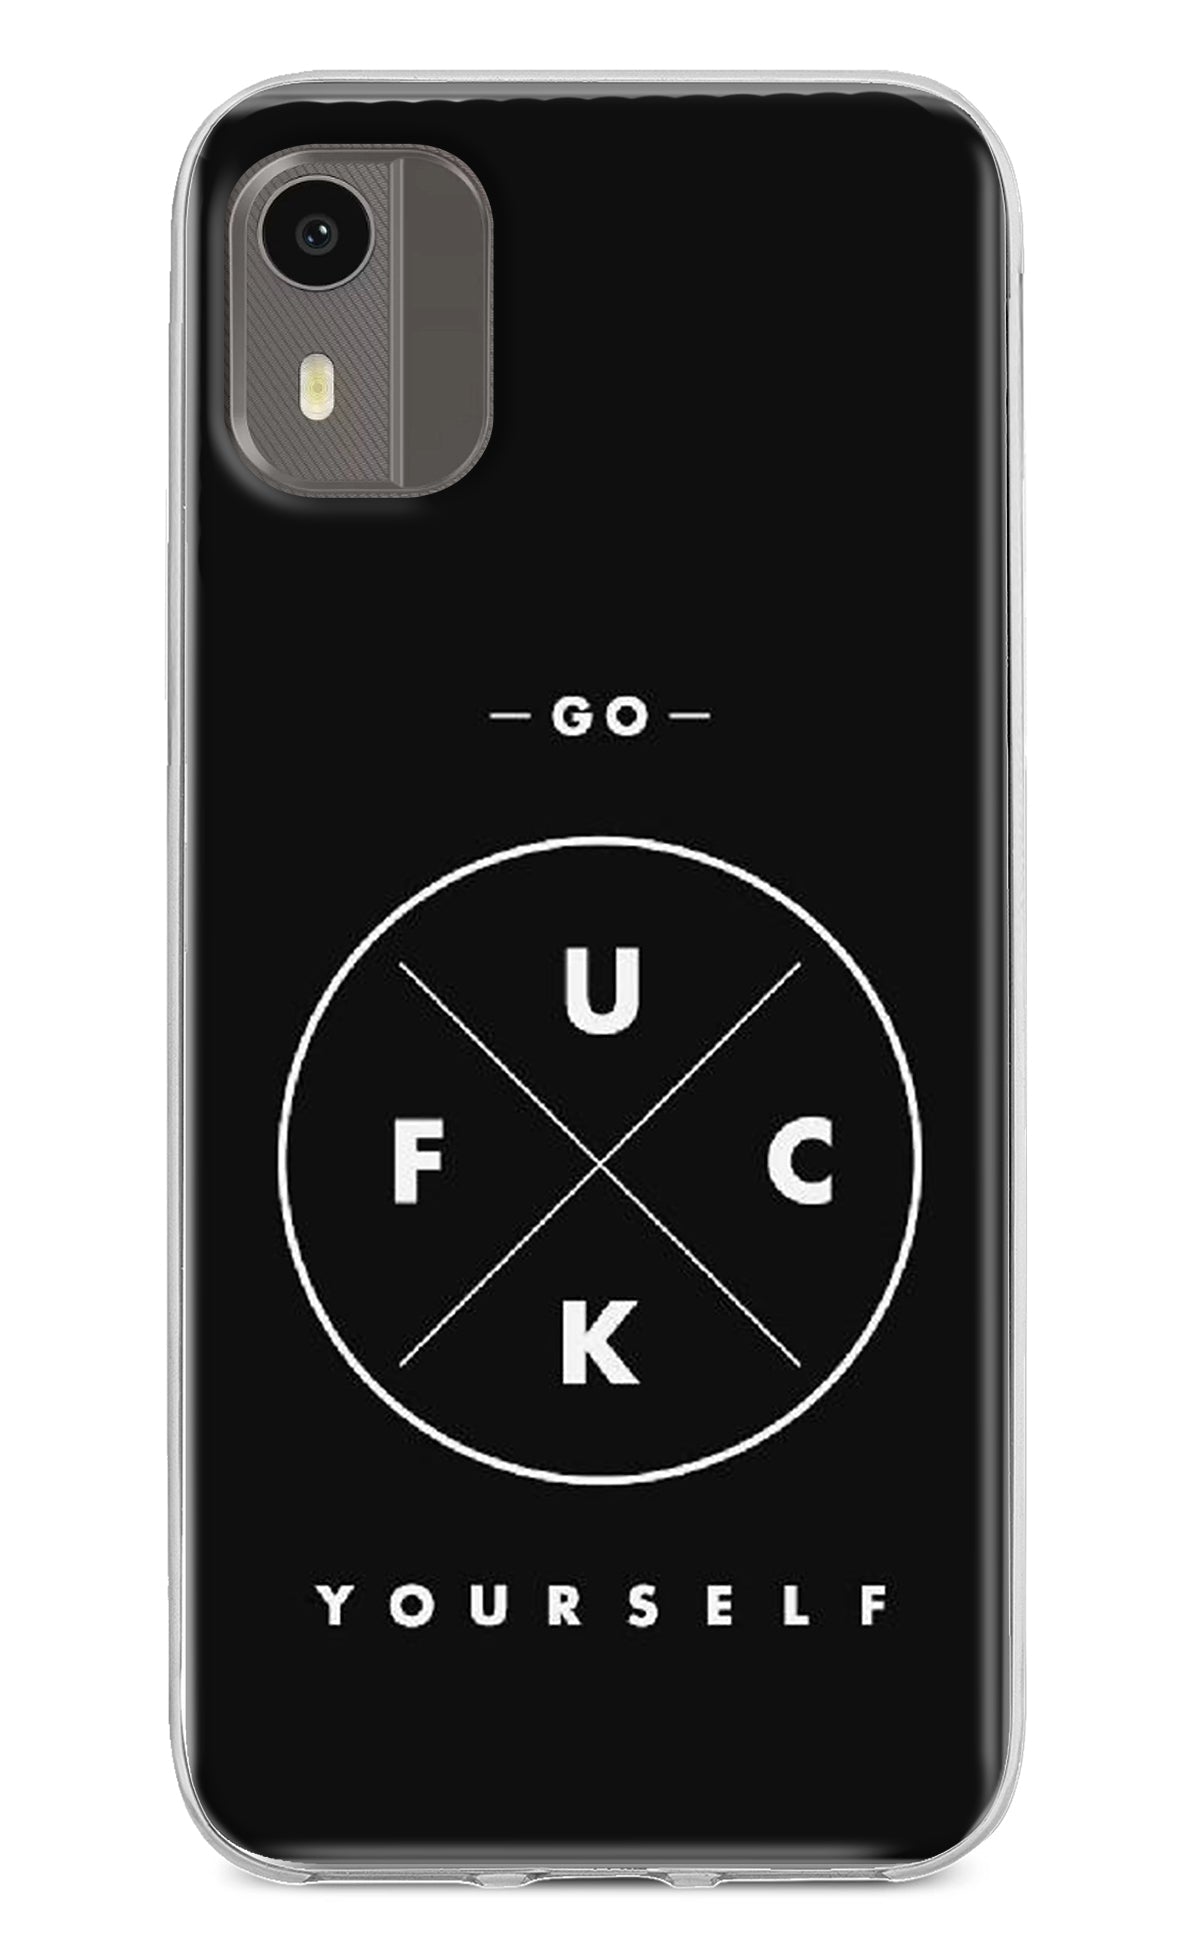 Go Fuck Yourself Nokia C12/C12 Pro Back Cover